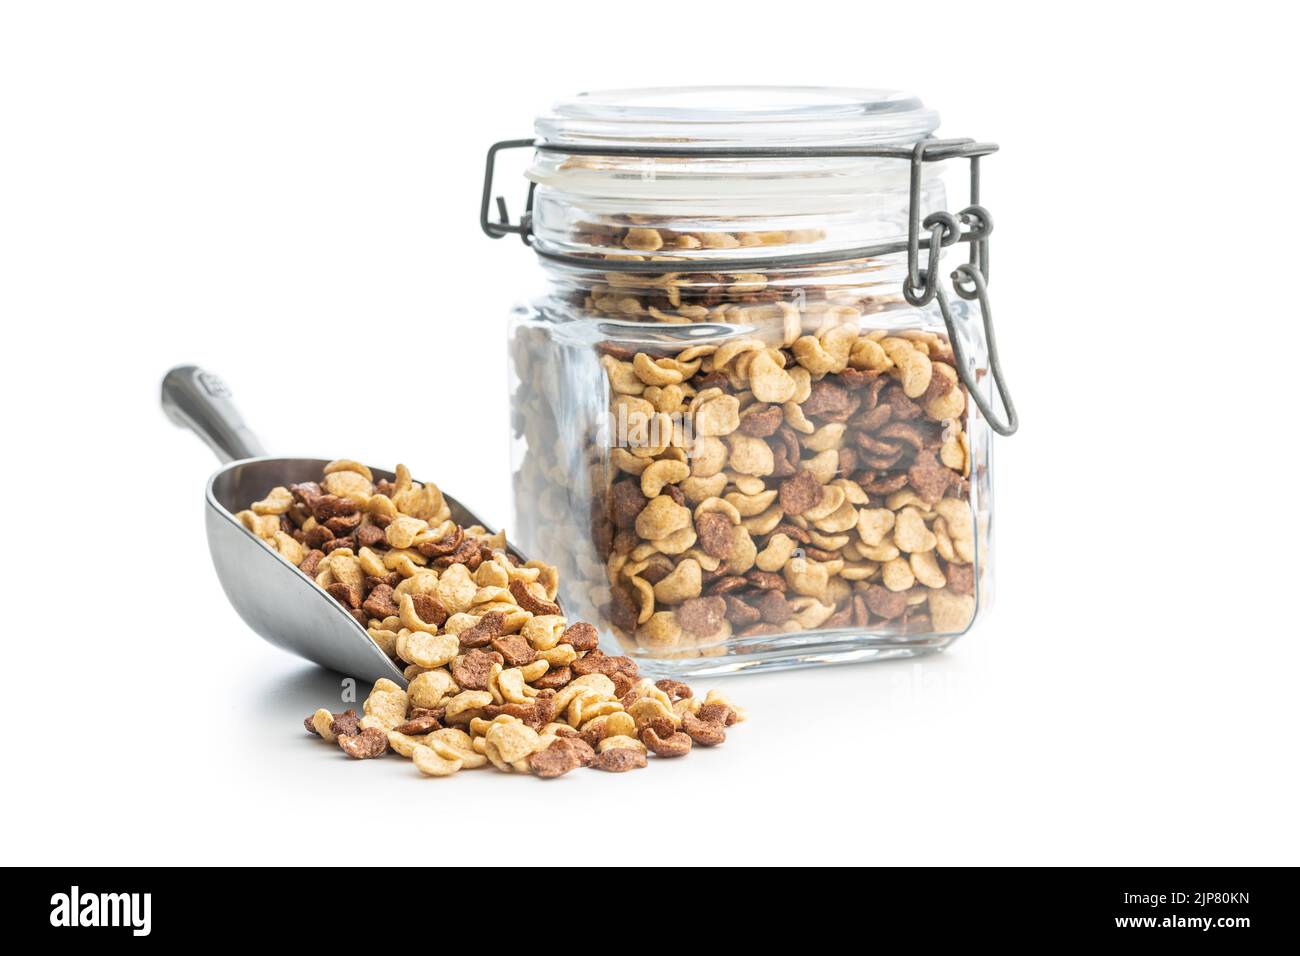 Breakfast cereal flakes in metal scoop isolated on a white background. Stock Photo